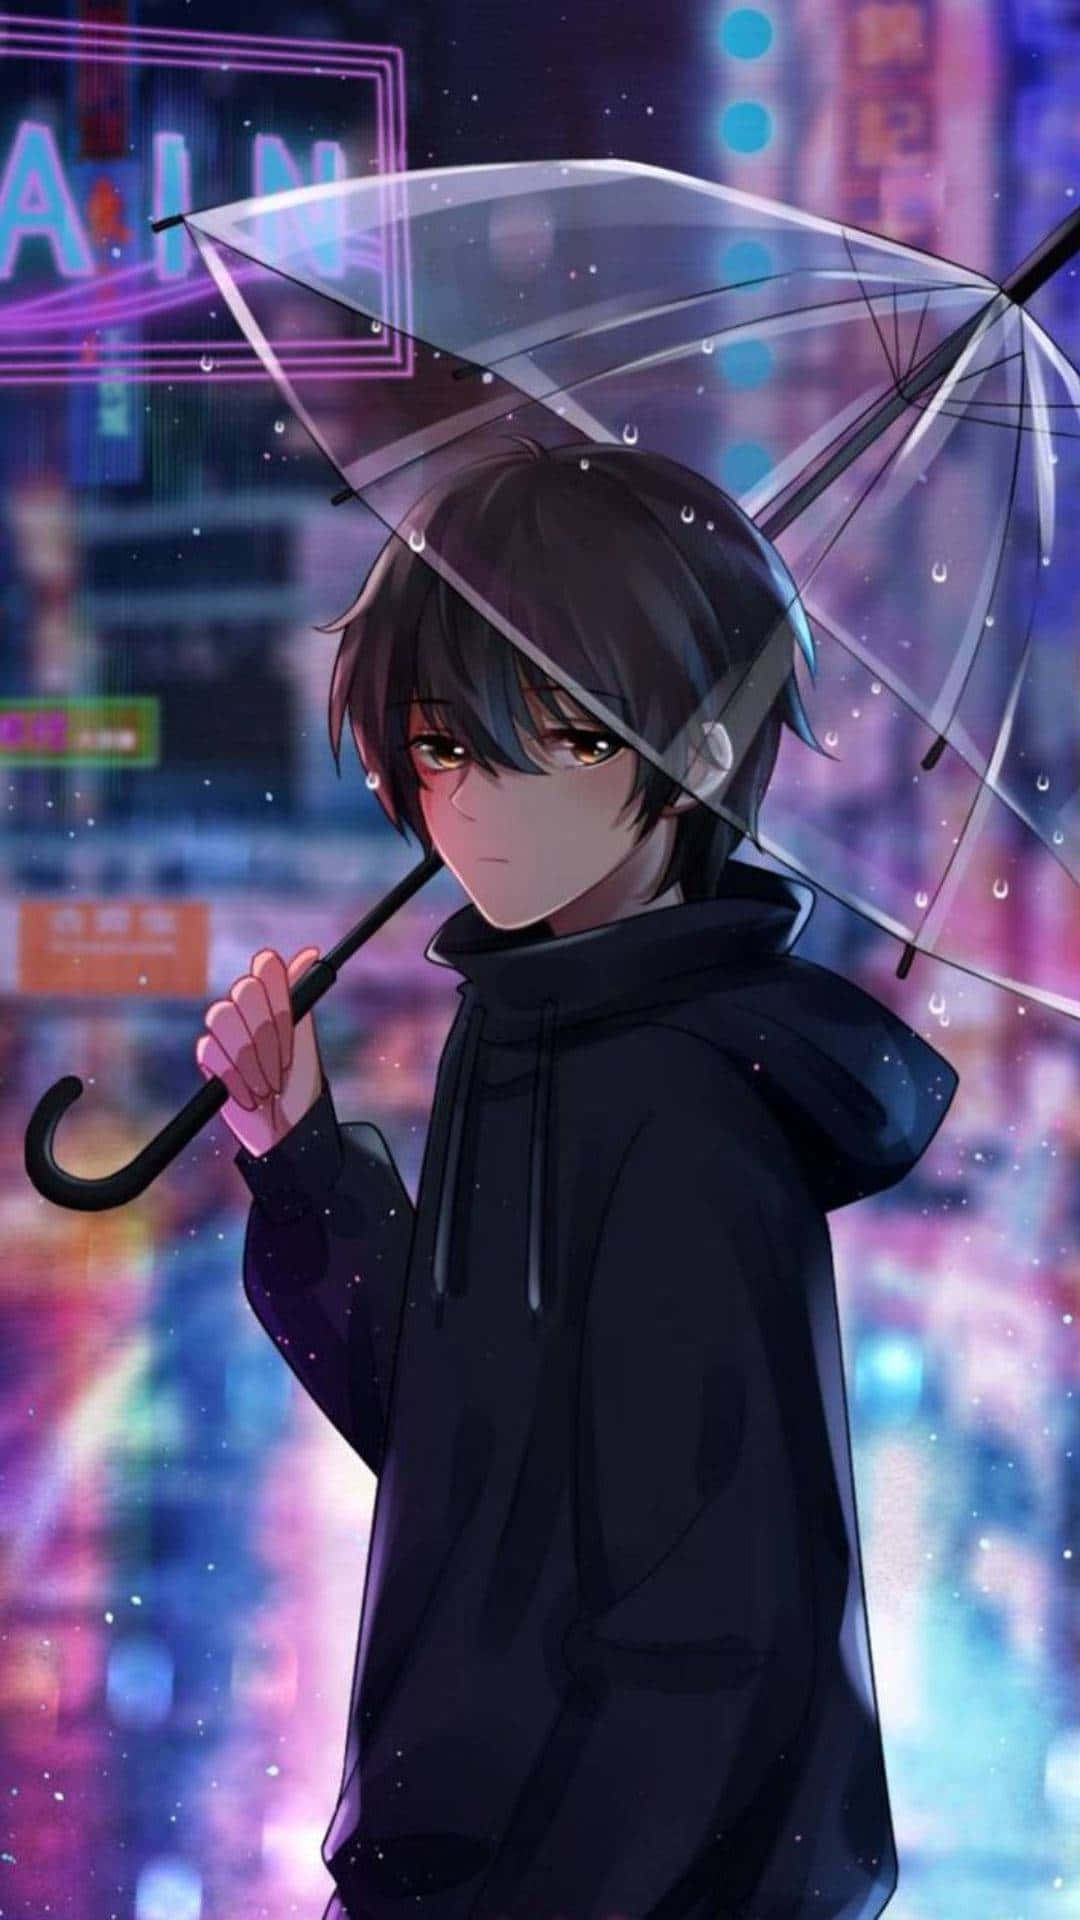 A young dark anime boy gazing at the stars Wallpaper